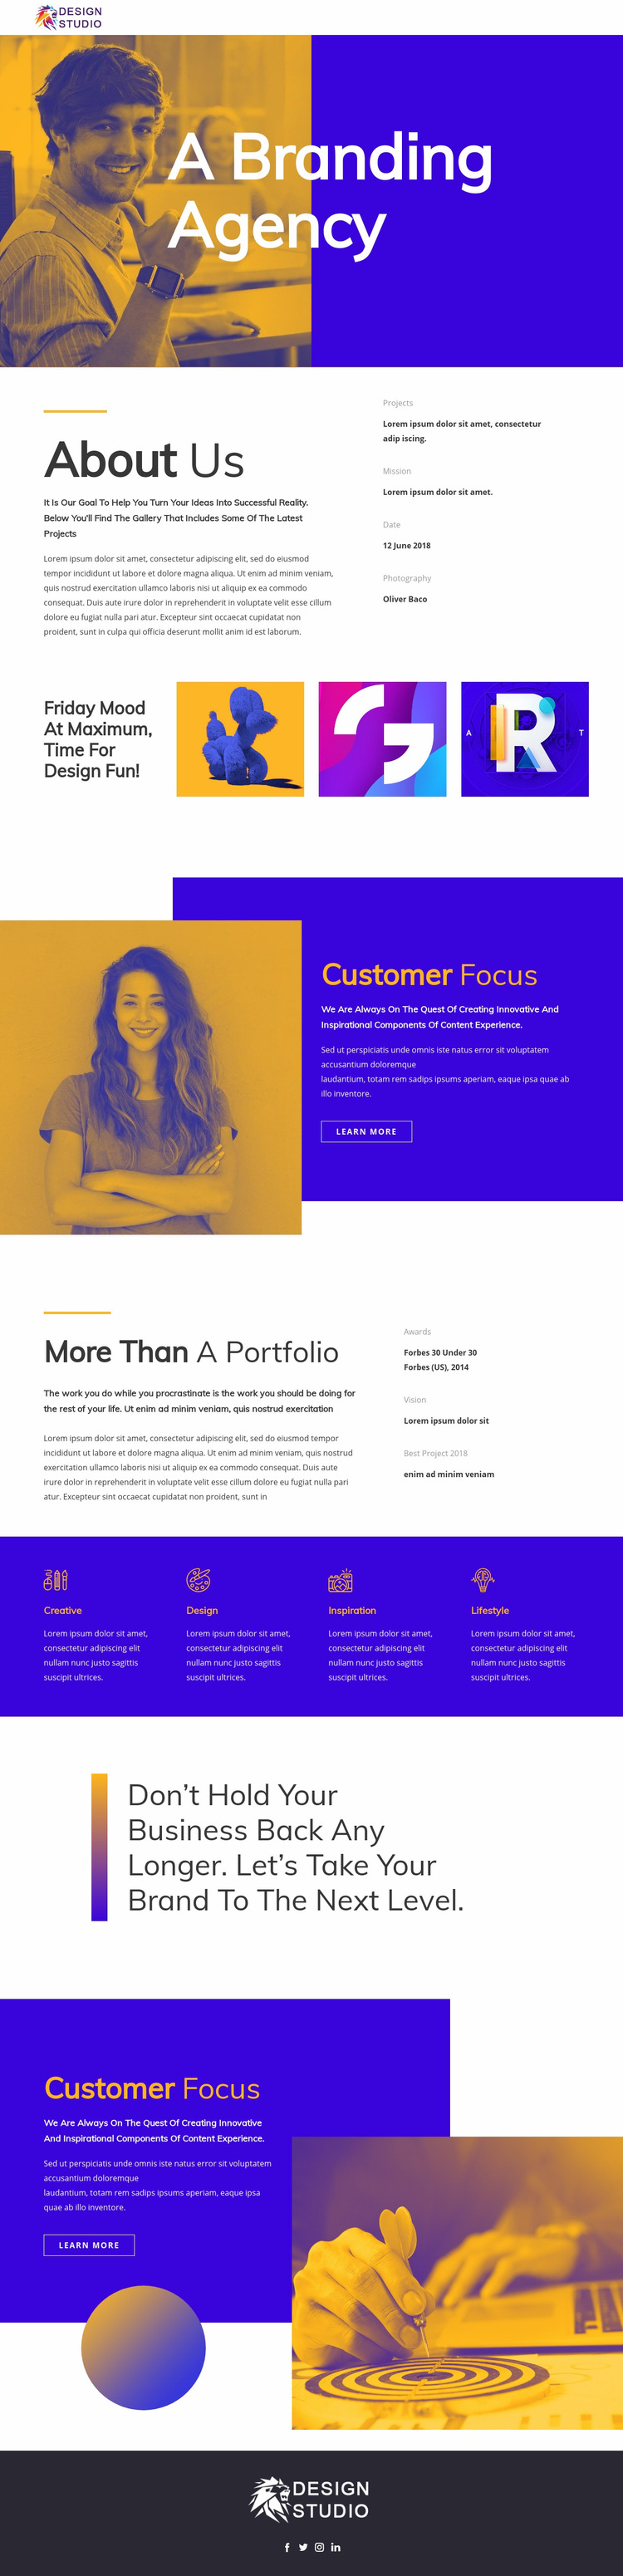 Branding agency for startup Web Page Design